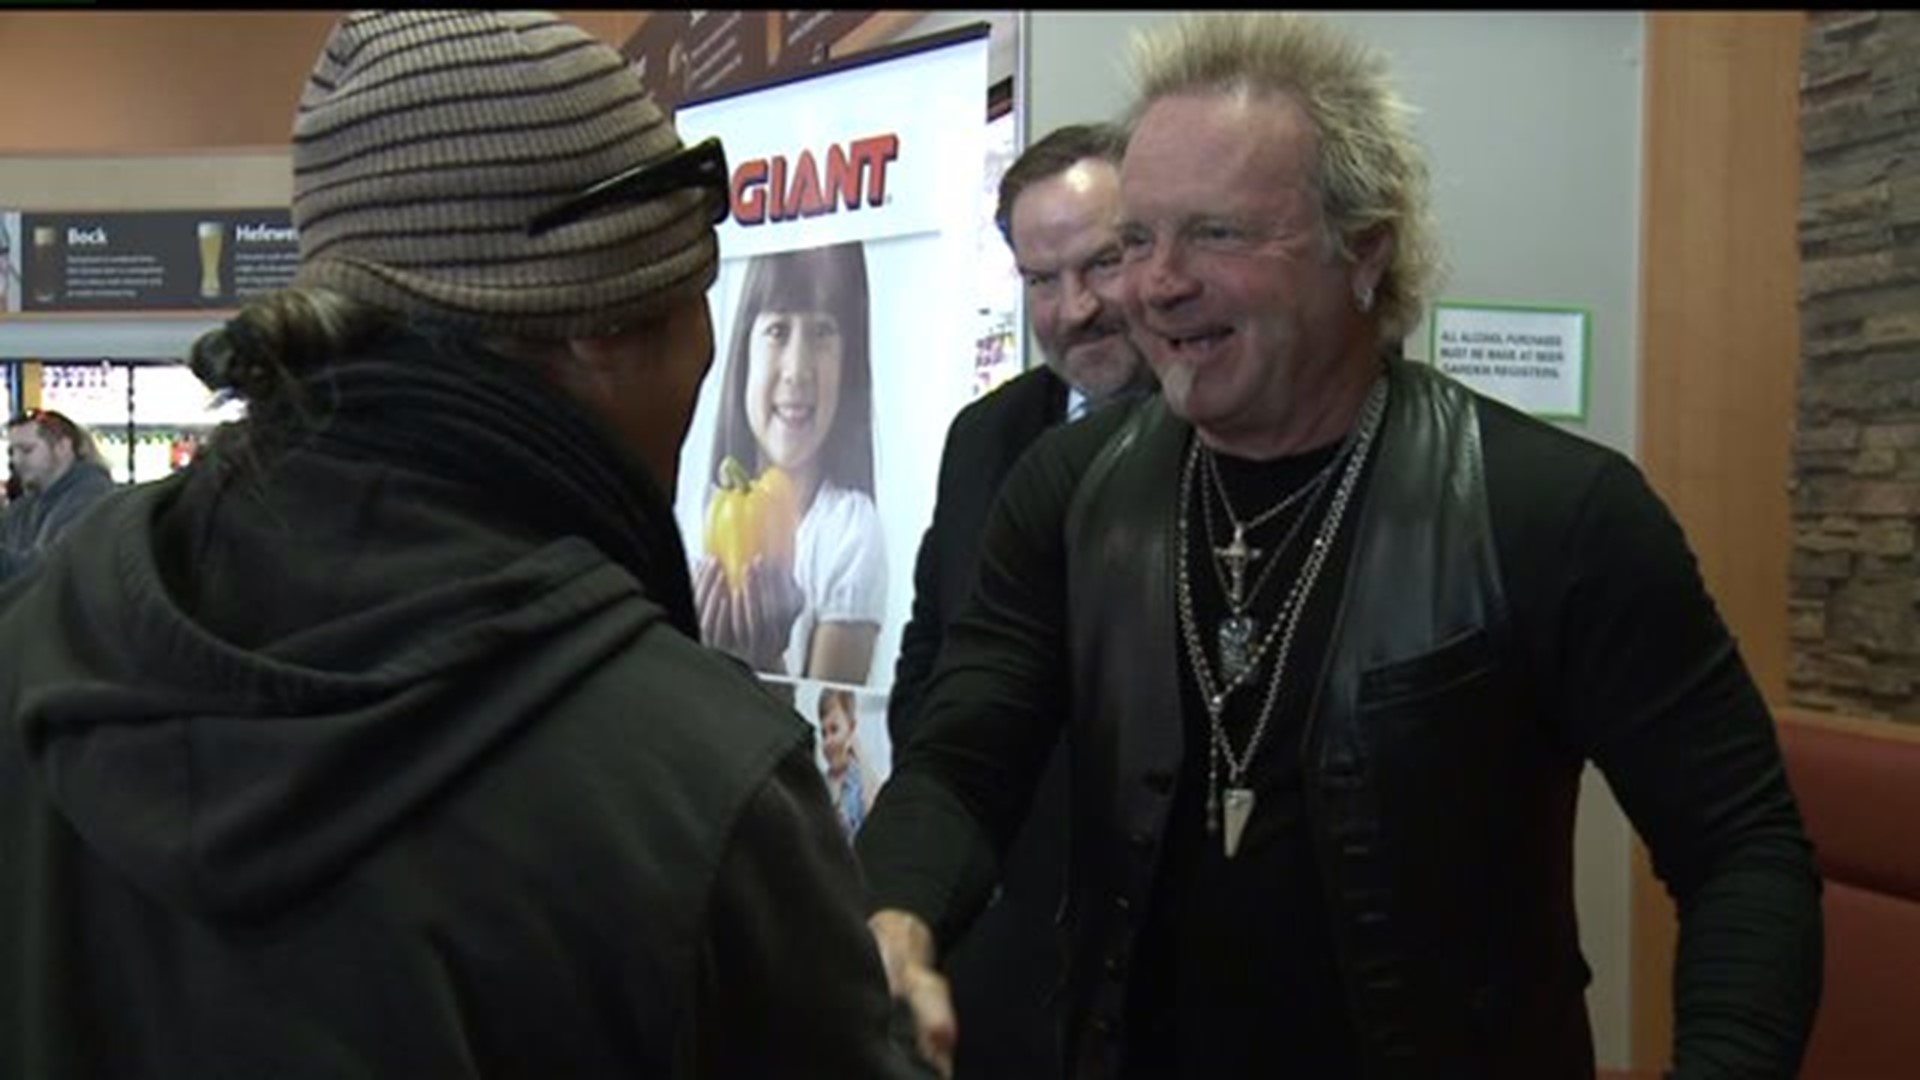 Aerosmith Drummer Joey Krammer Stops by Local Giant